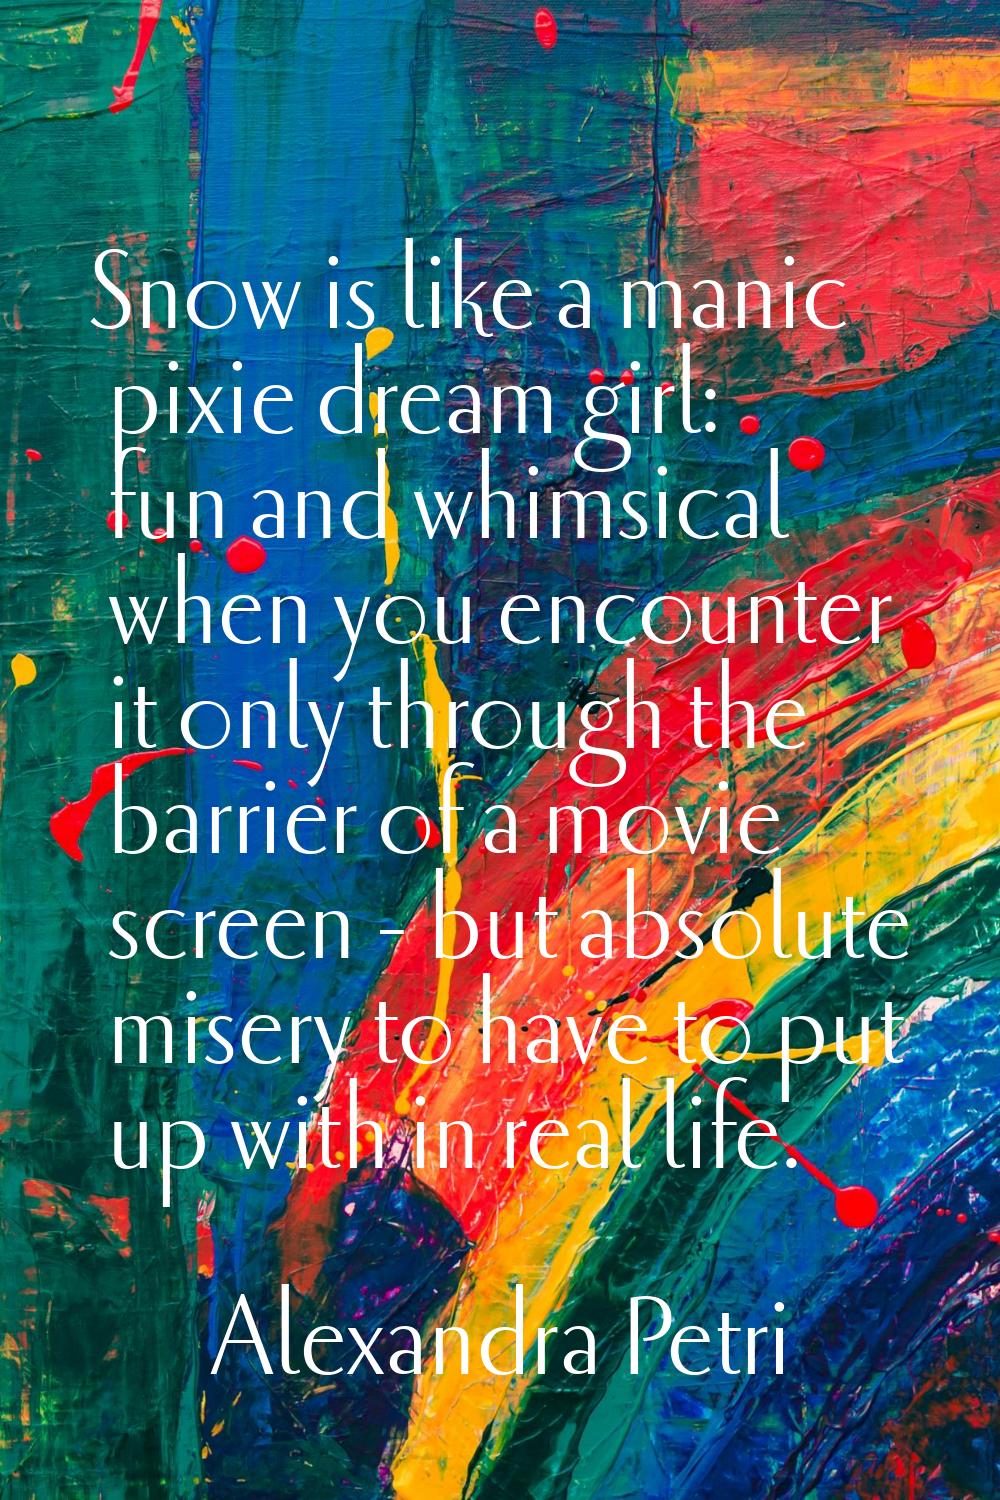 Snow is like a manic pixie dream girl: fun and whimsical when you encounter it only through the bar